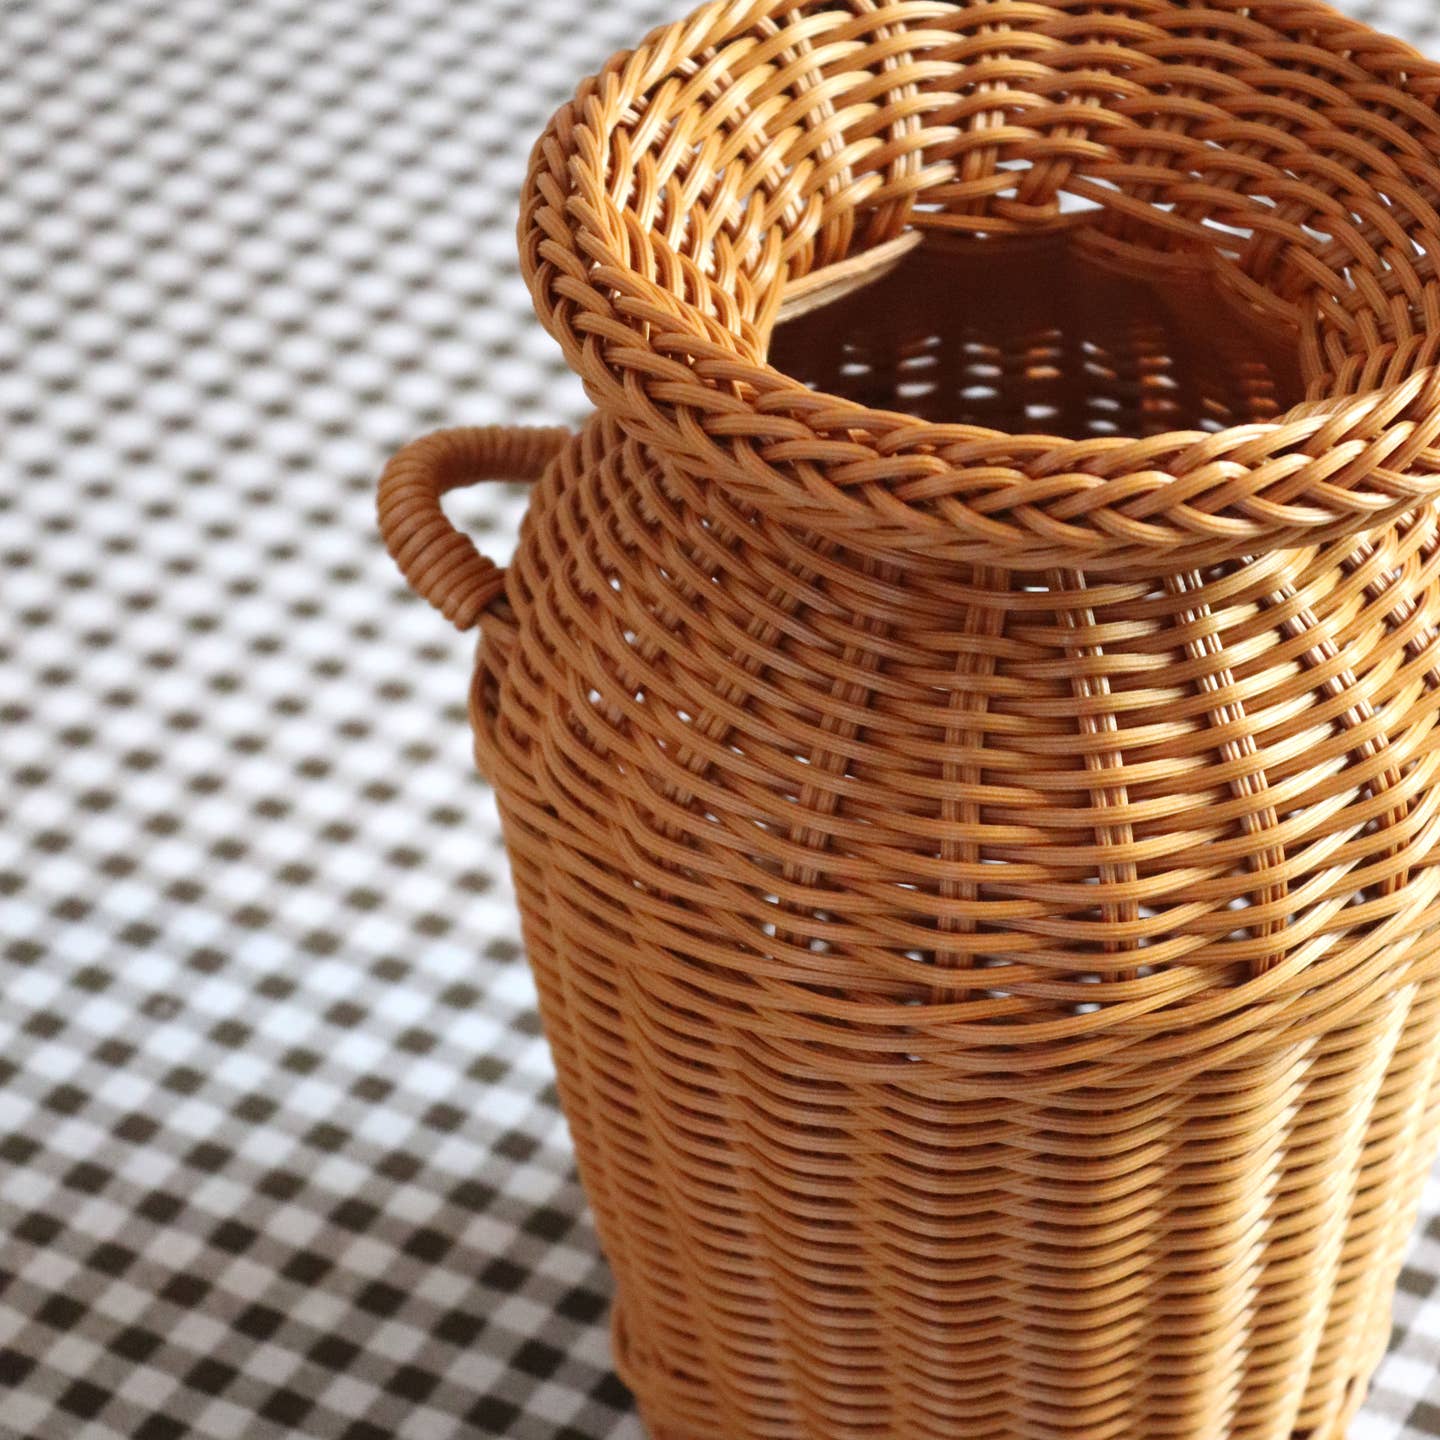 Rattan Effect Woven Vase with Handles